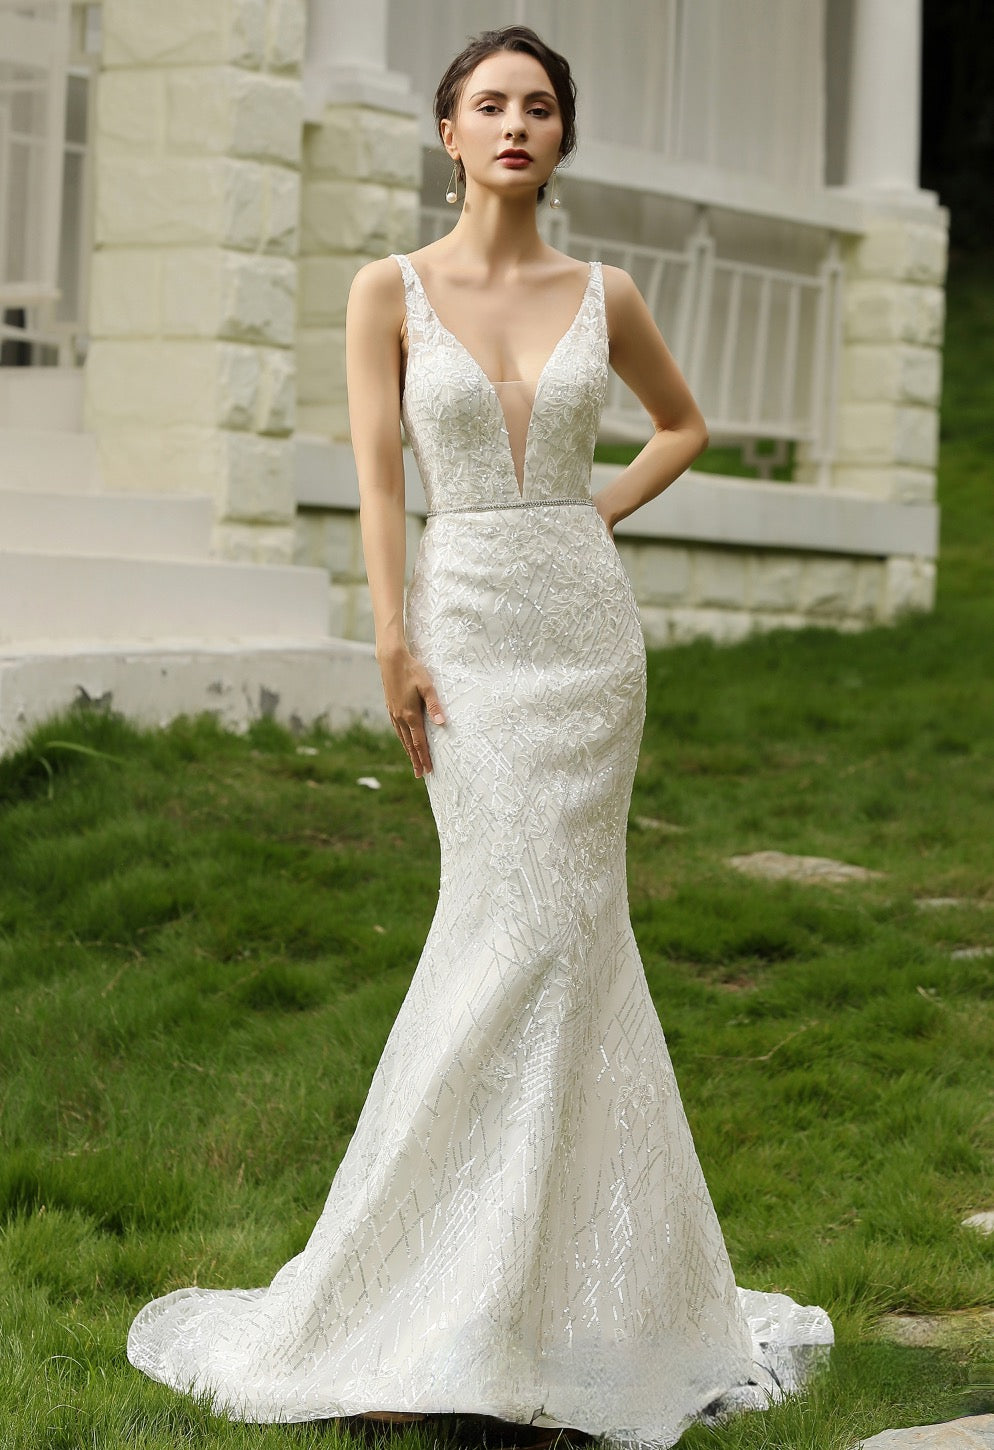 Glittery Fitted Wedding Dress With Deep V Neckline